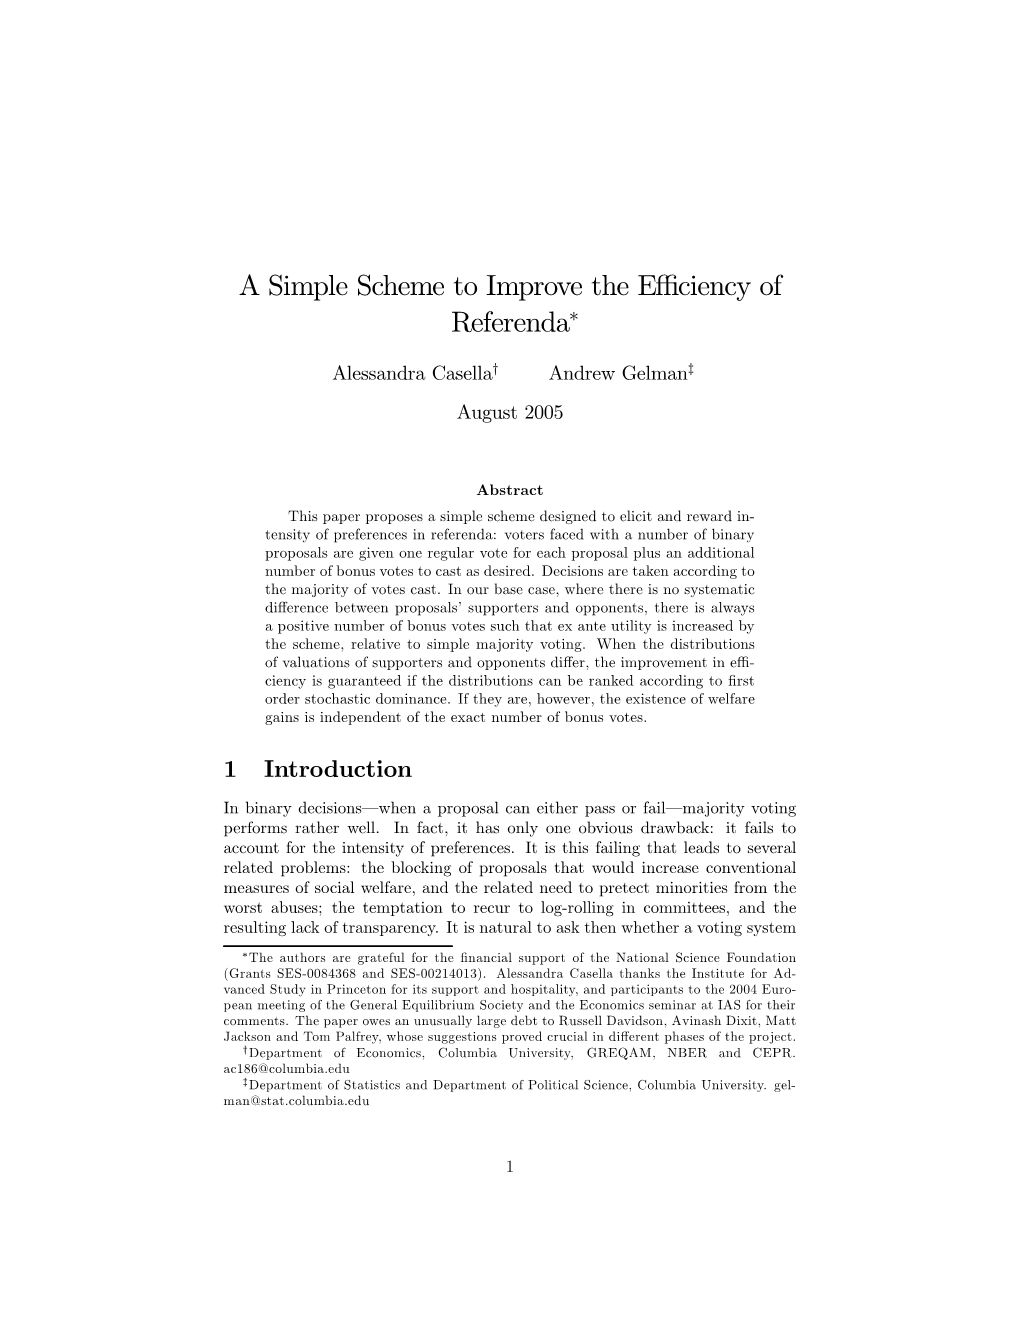 A Simple Scheme to Improve the Efficiency of Referenda∗